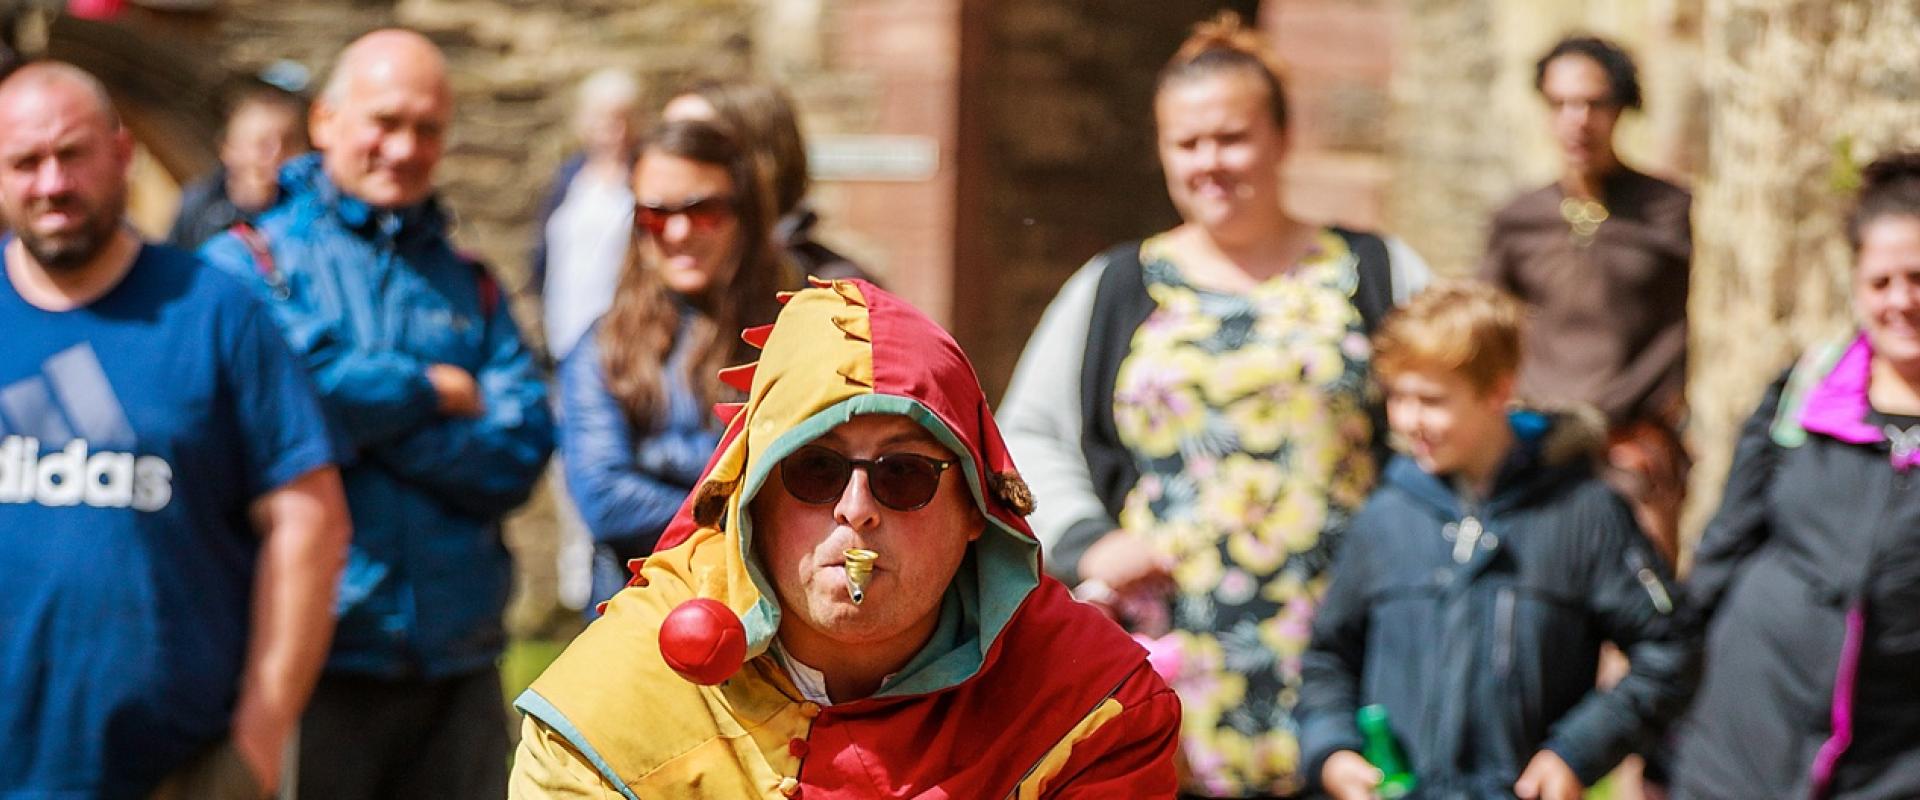 Conwy jester blowing a kazoo